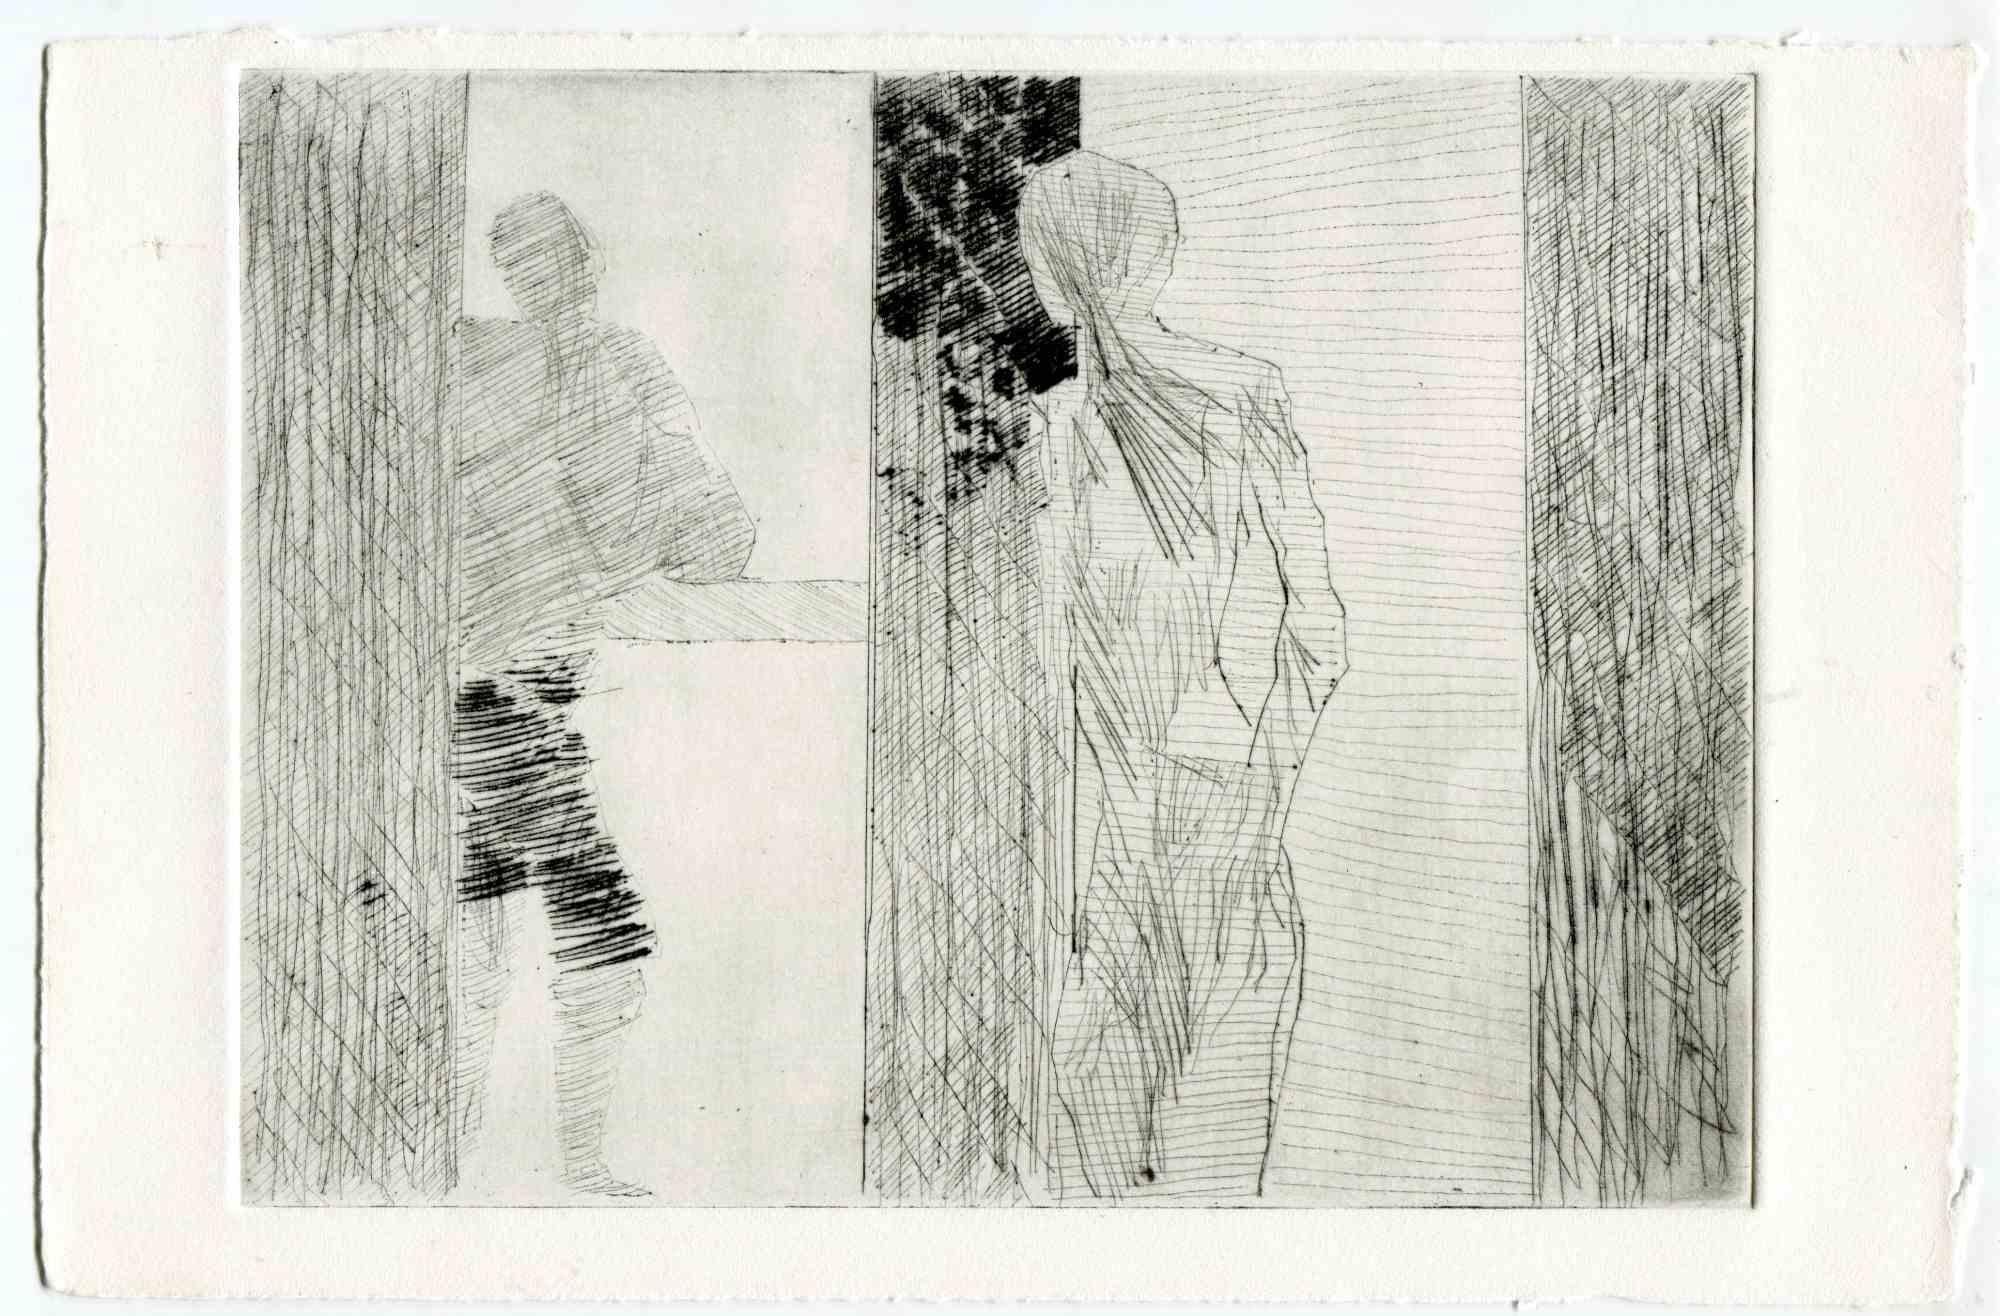 Unknown Figurative Print - Loneliness - Original Etching and Drypoint - Mid-20th Century